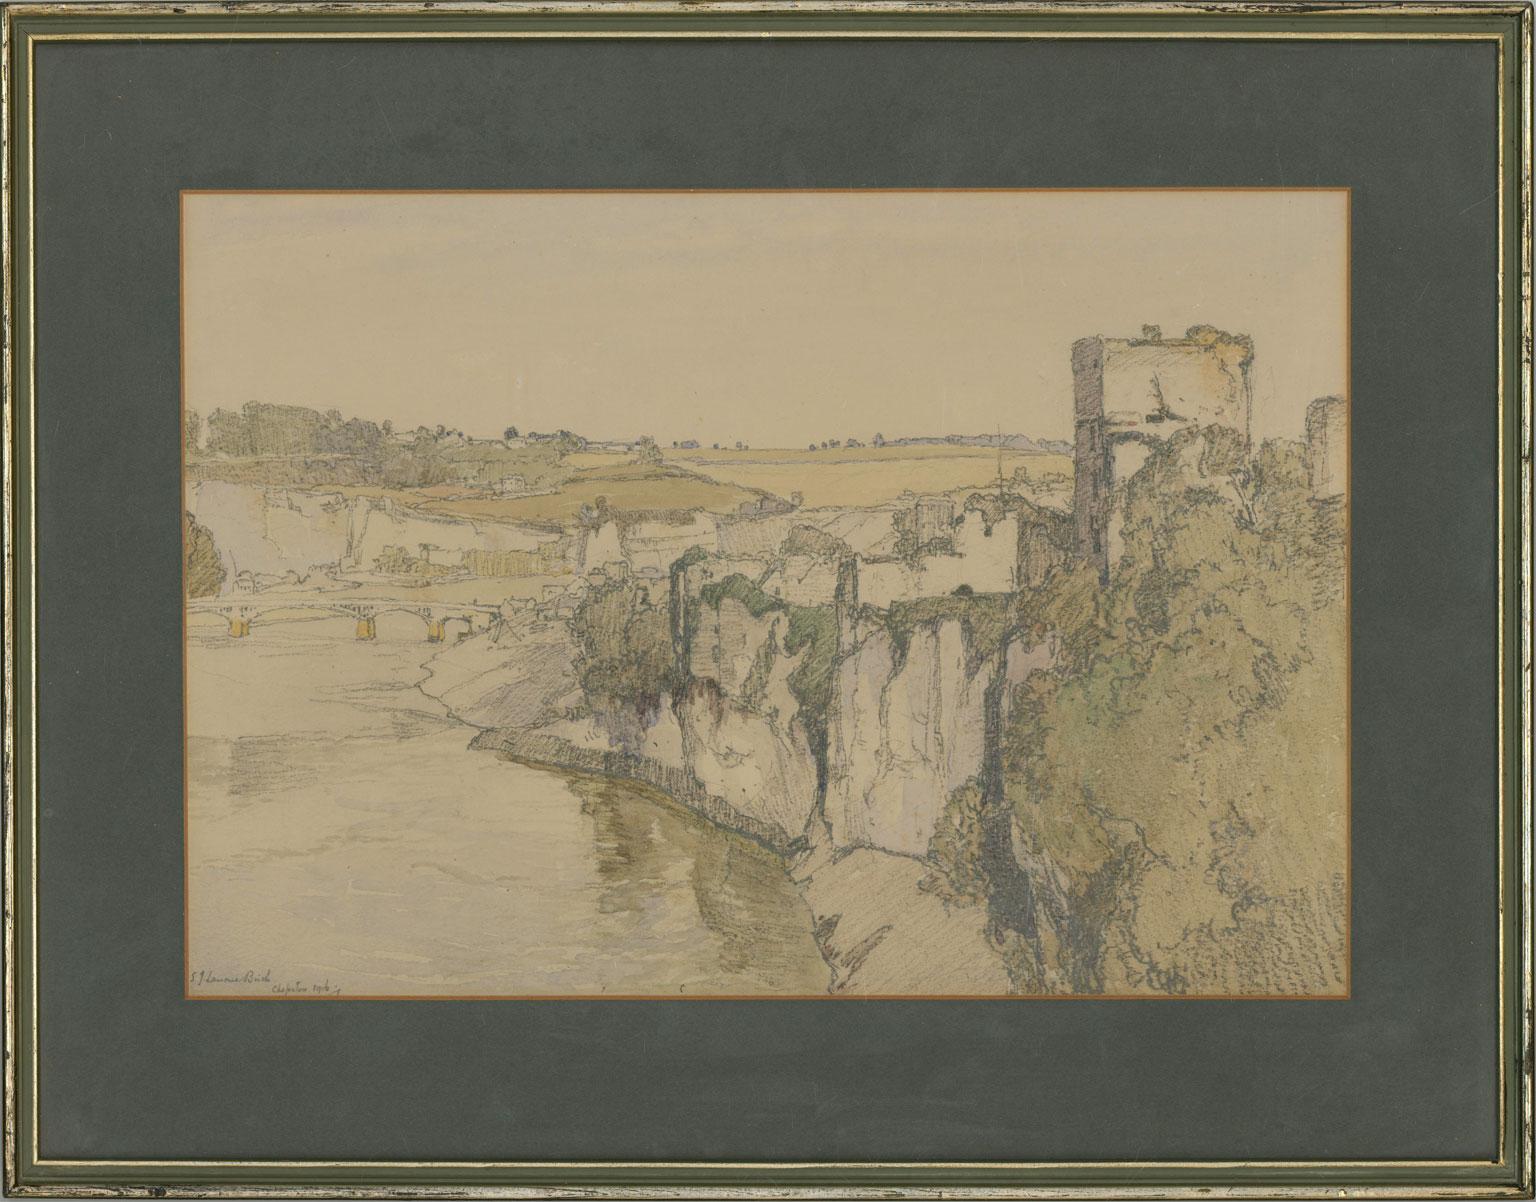 A fine and carefully detailed 1916 watercolour with graphite by the artist Samuel John Lamorna Birch (1869-1955), of Chepstow Castle on the river Wye in Wales. This meticulously detailed content has an angled viewpoint, adding interest to the scene,